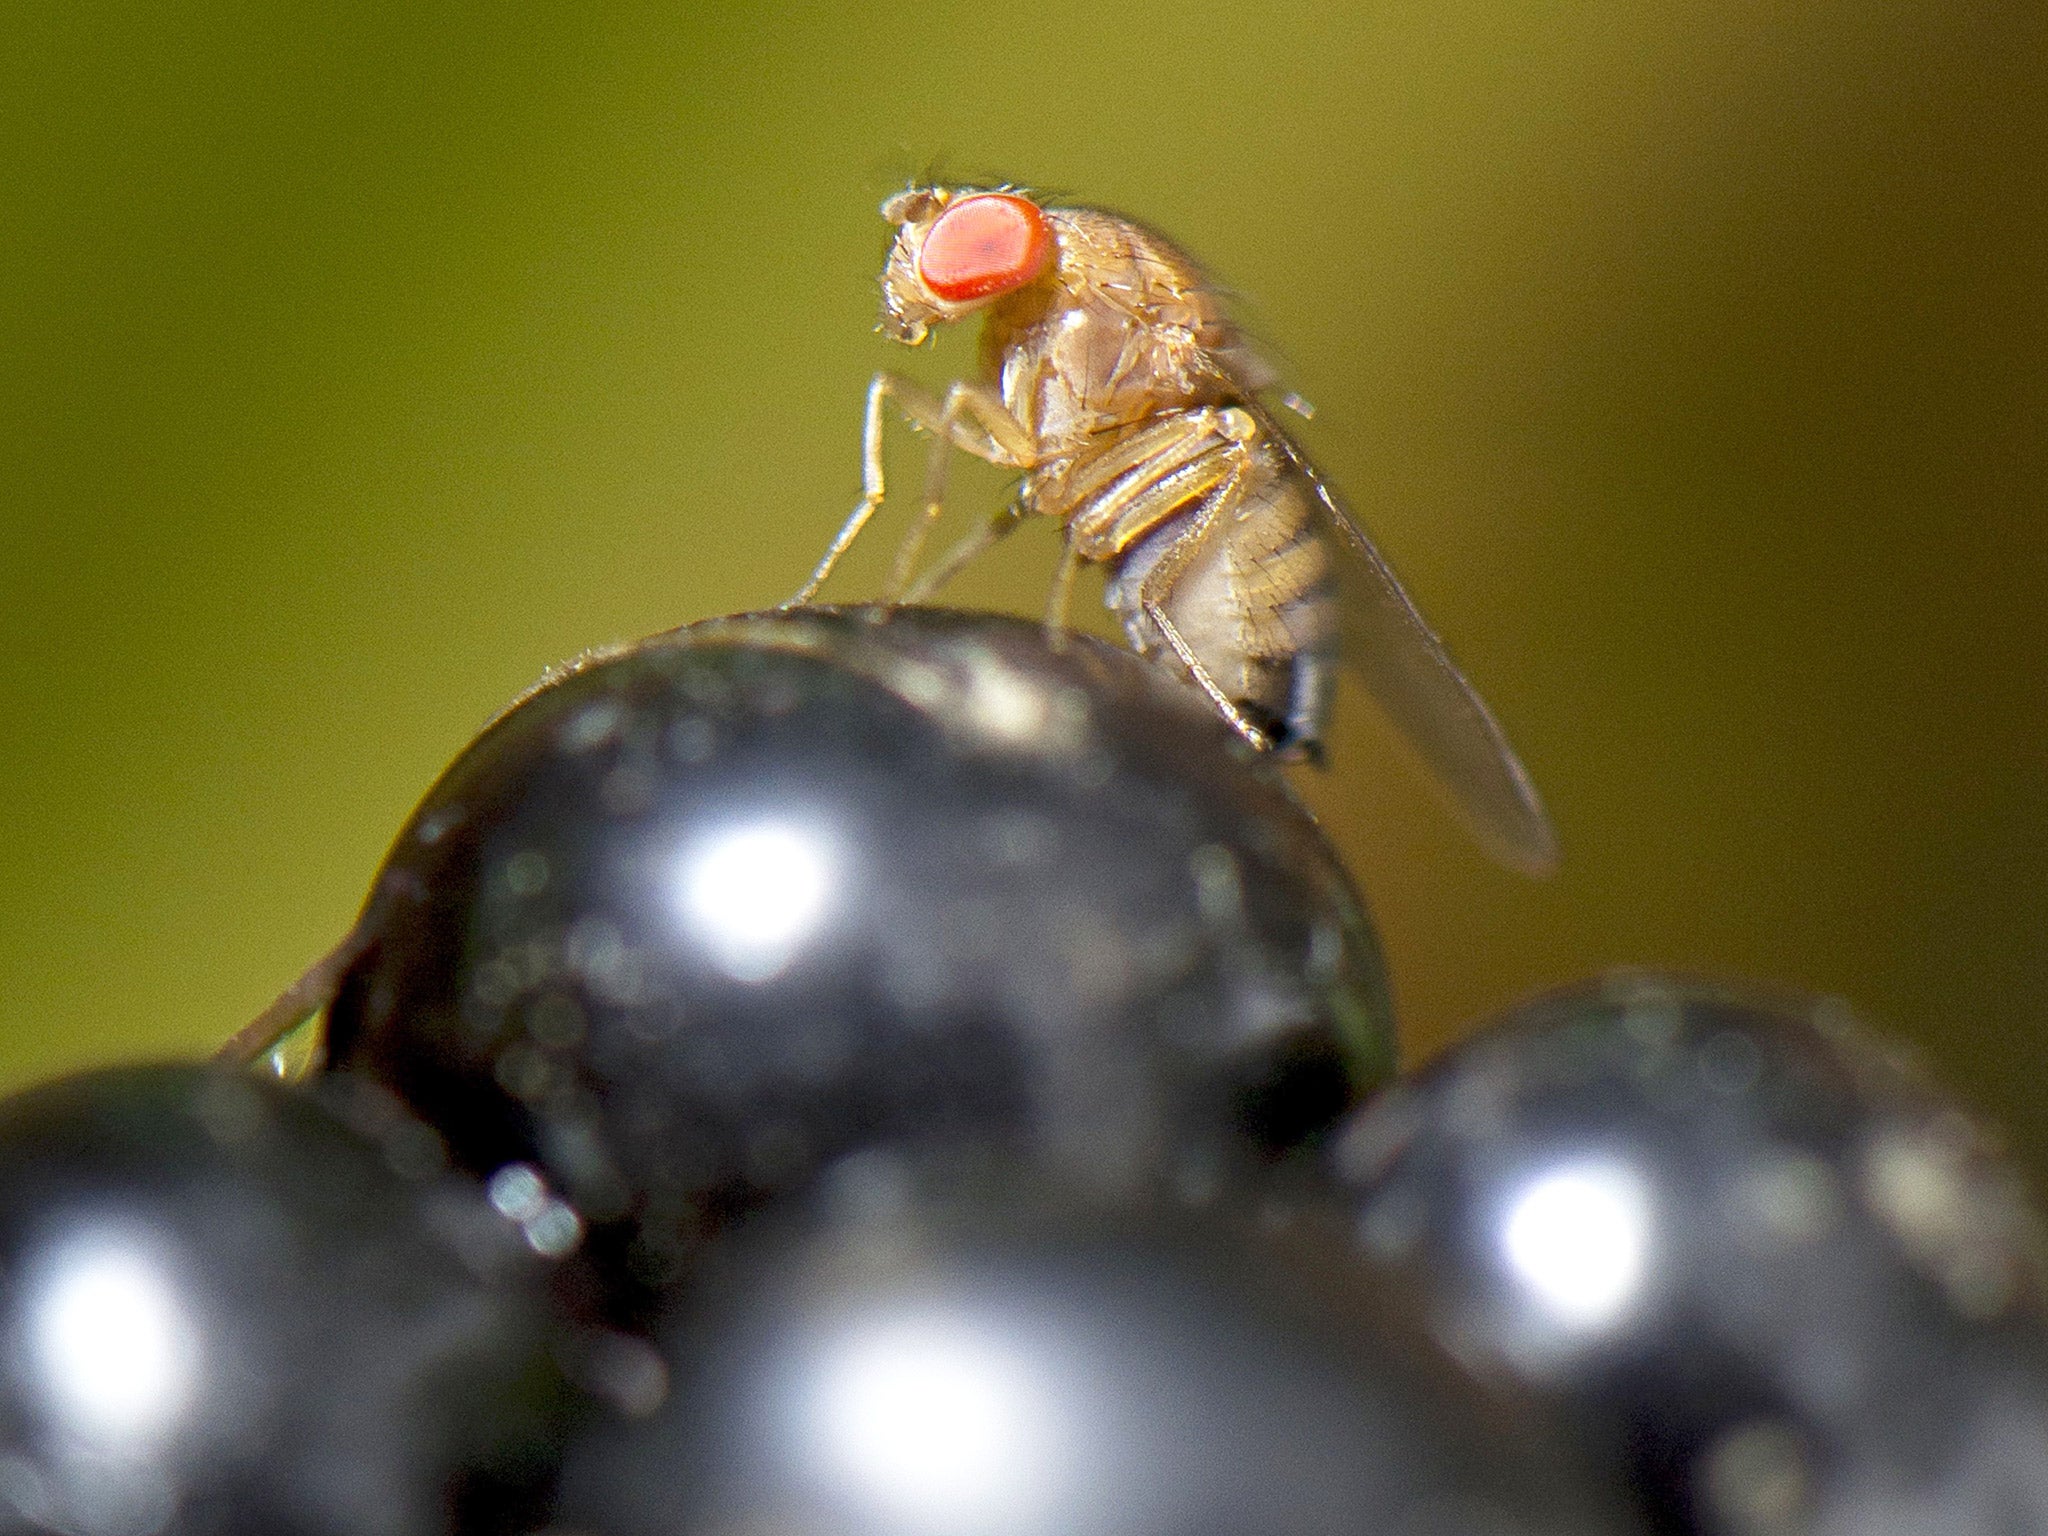 Fruit flies can lay up to 500 eggs at a time